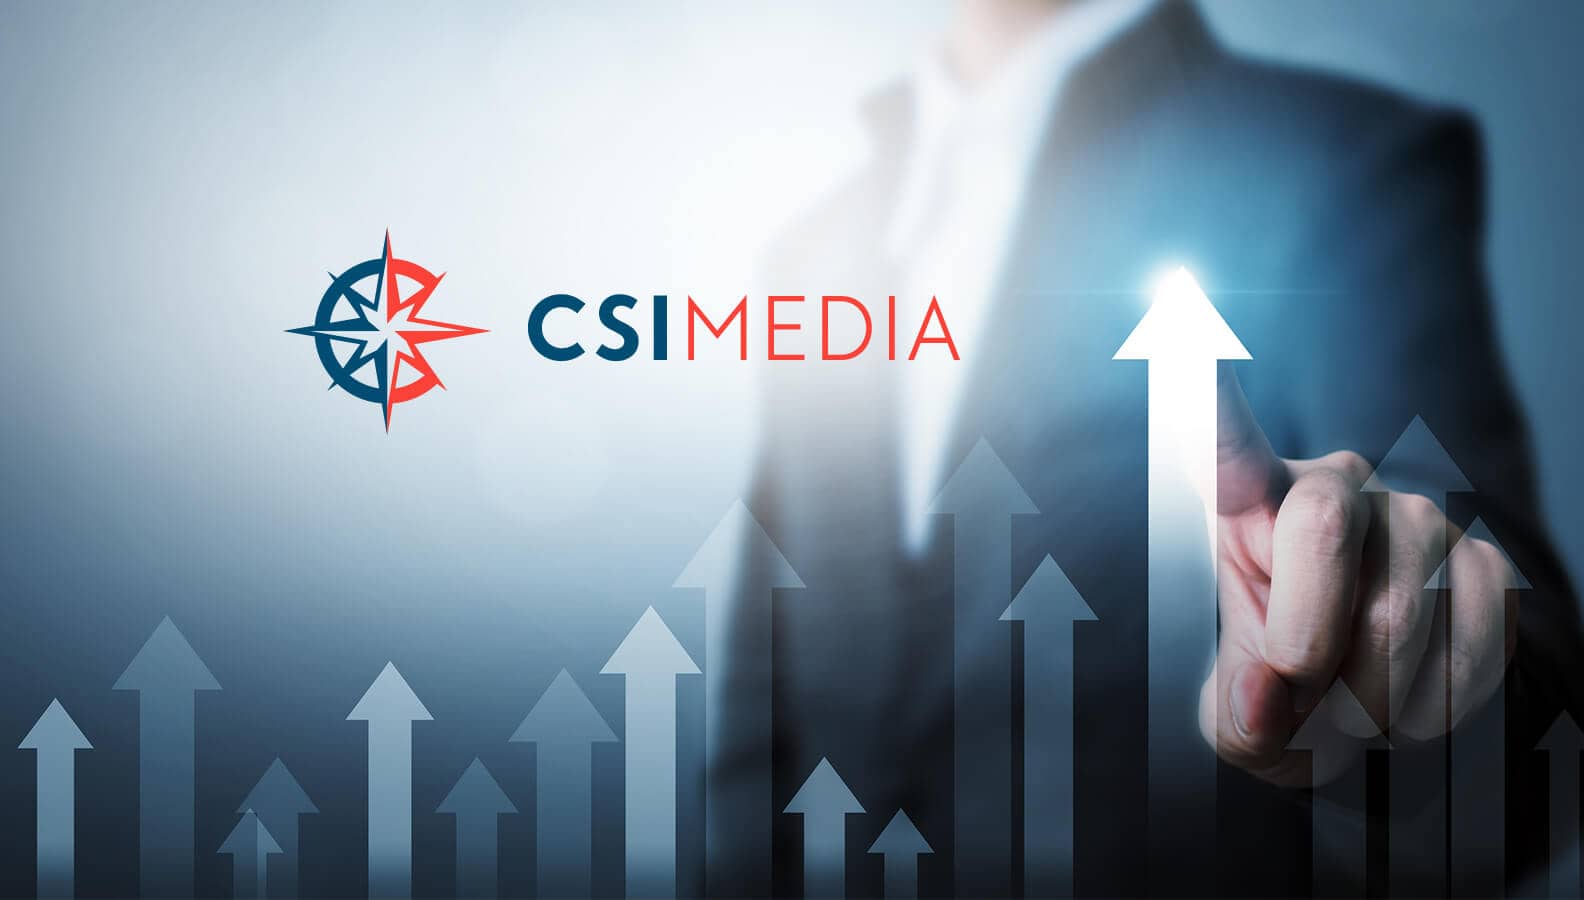 CSI Increases Investments in B2B Payments Solutions for the Media and Advertising Industry